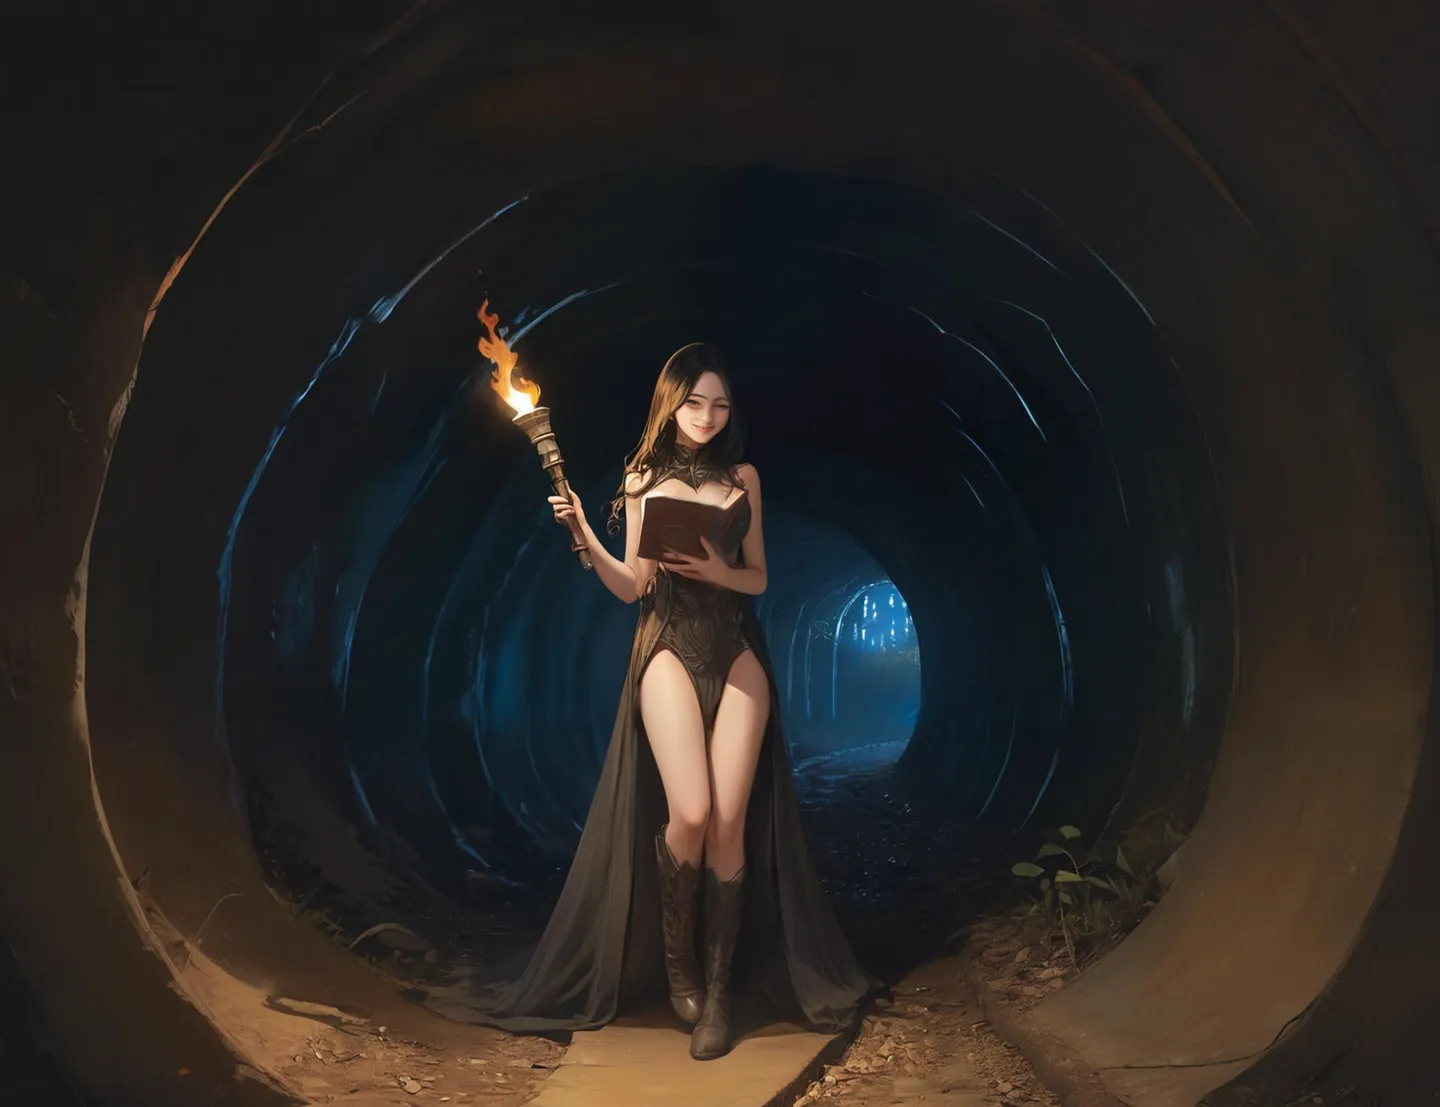 A fantasy woman dressed in a black outfit holding a torch and a book, standing inside a dark tunnel. This AI generated image uses Stable Diffusion.